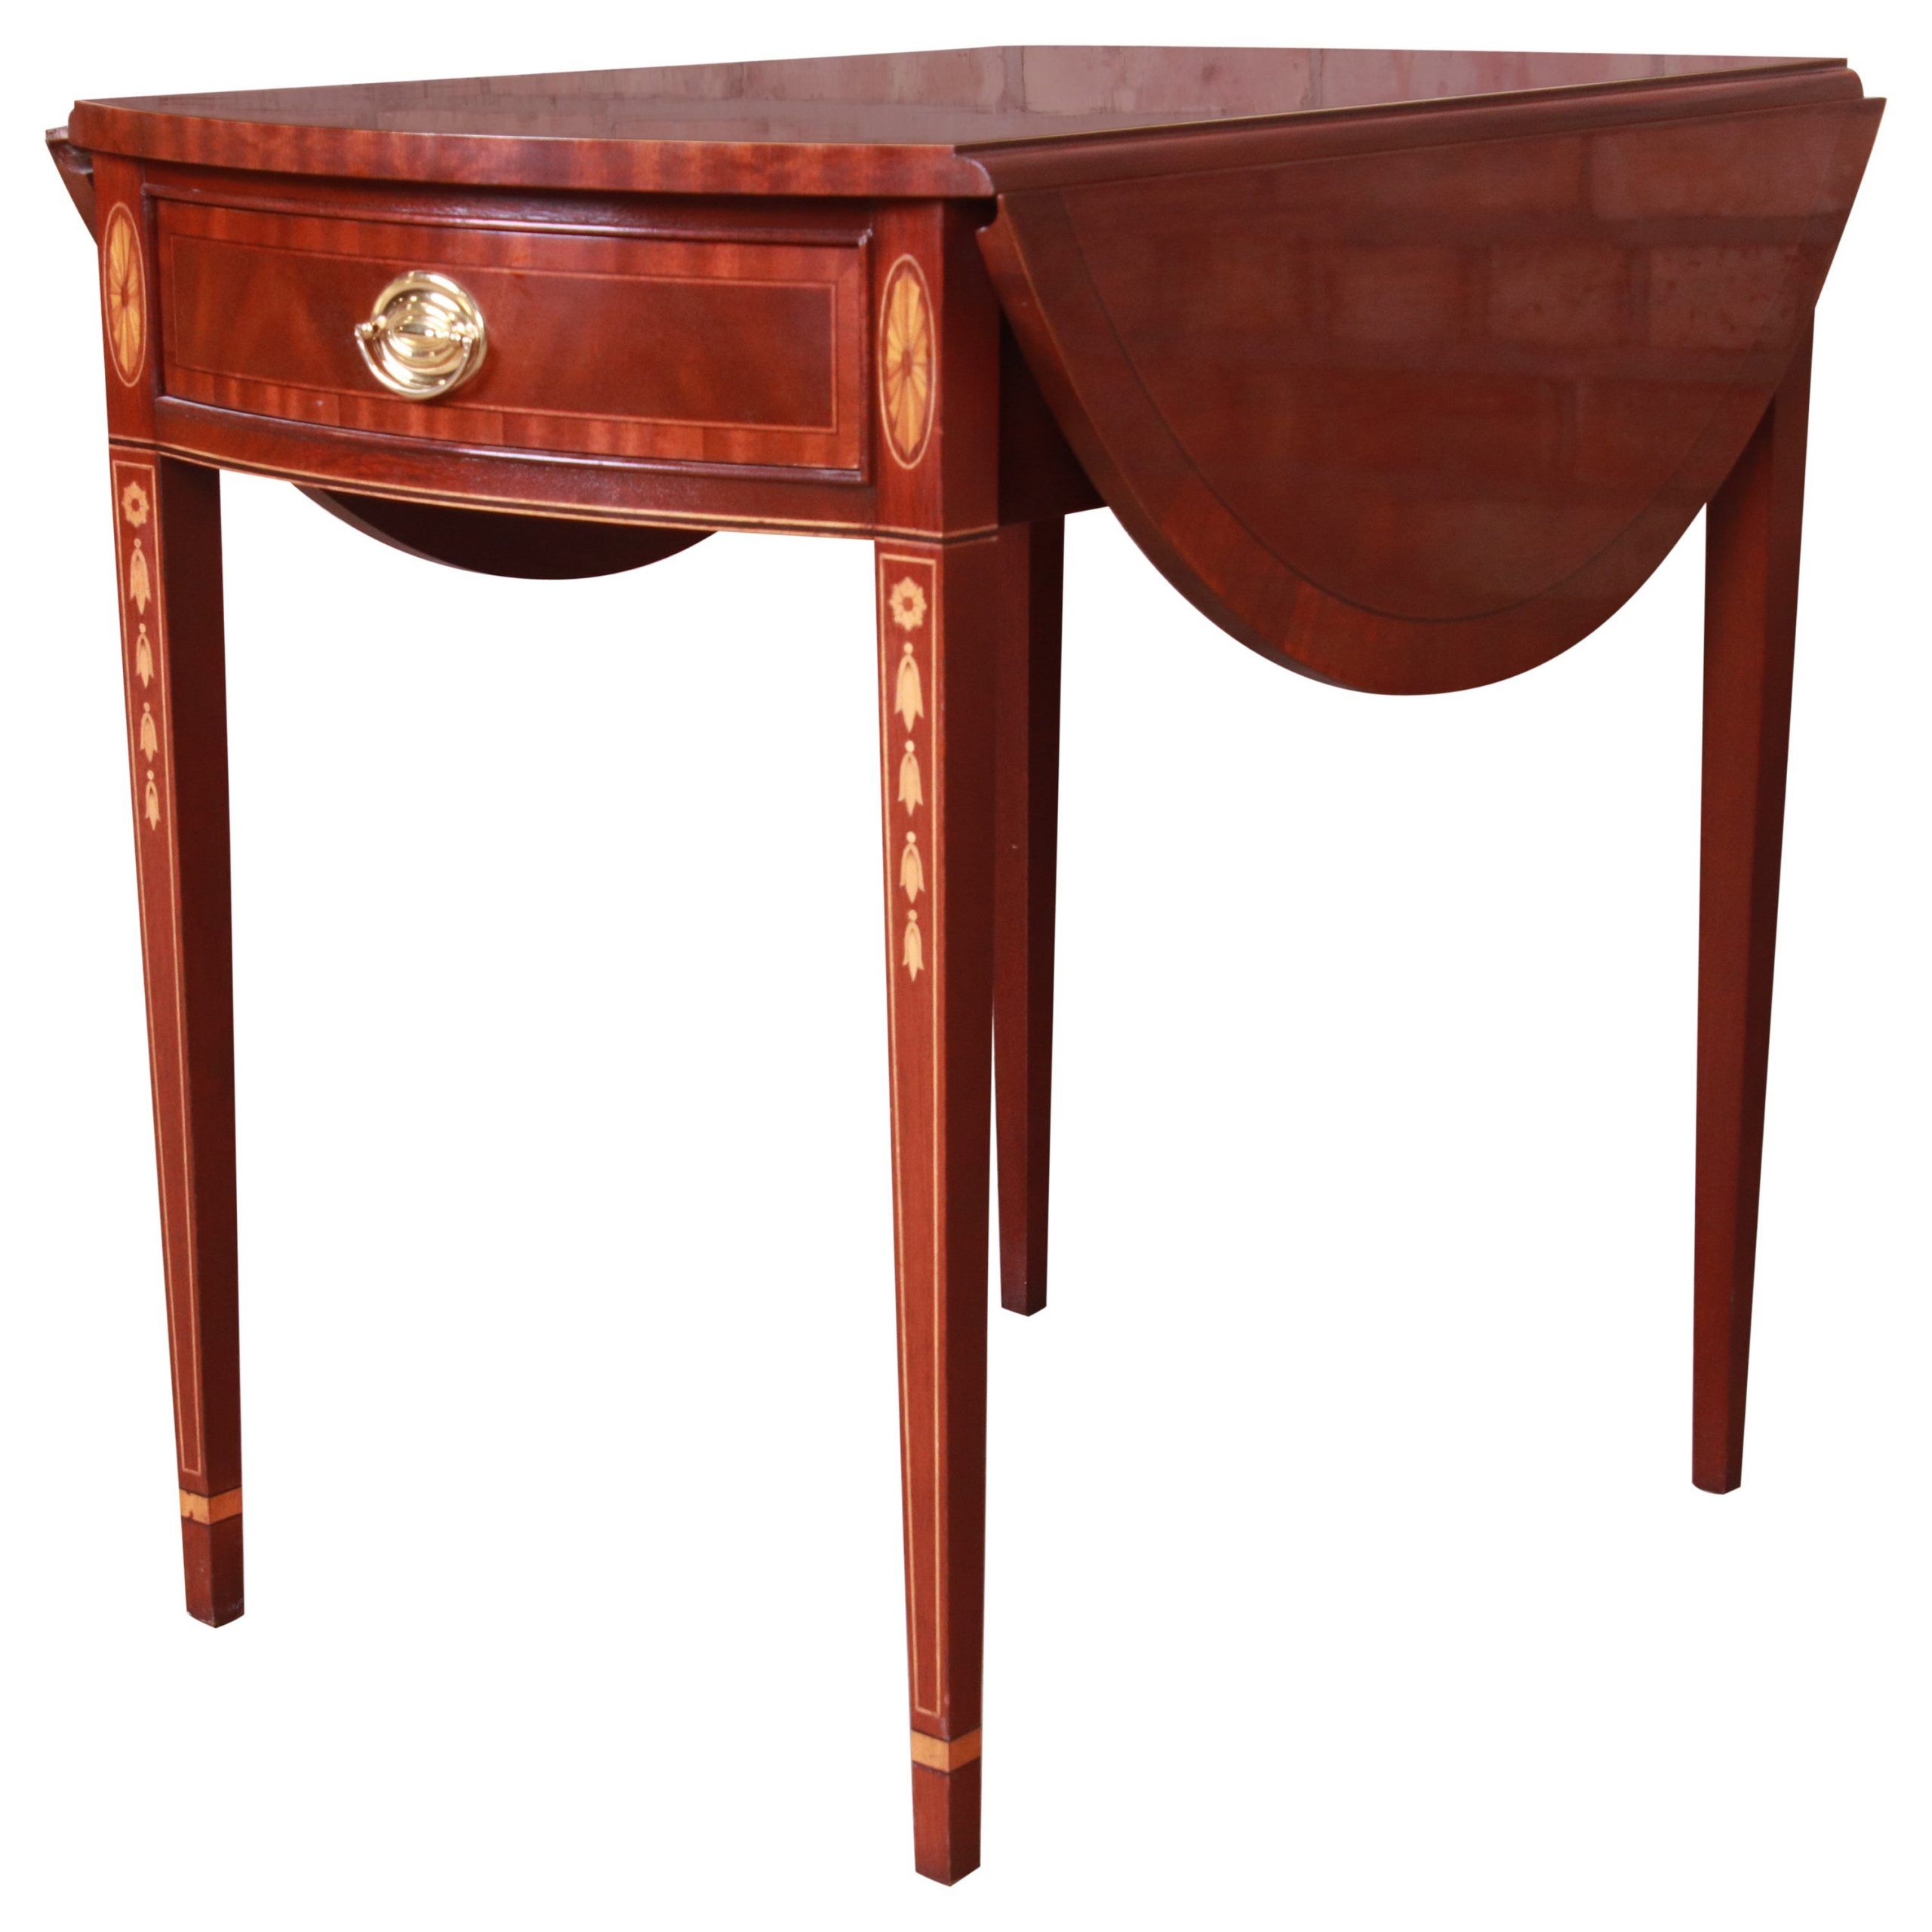 Very Pretty Small Oval Flame Mahogany Coffee Table Or Side Intended For 2 Drawer Oval Coffee Tables (View 2 of 15)